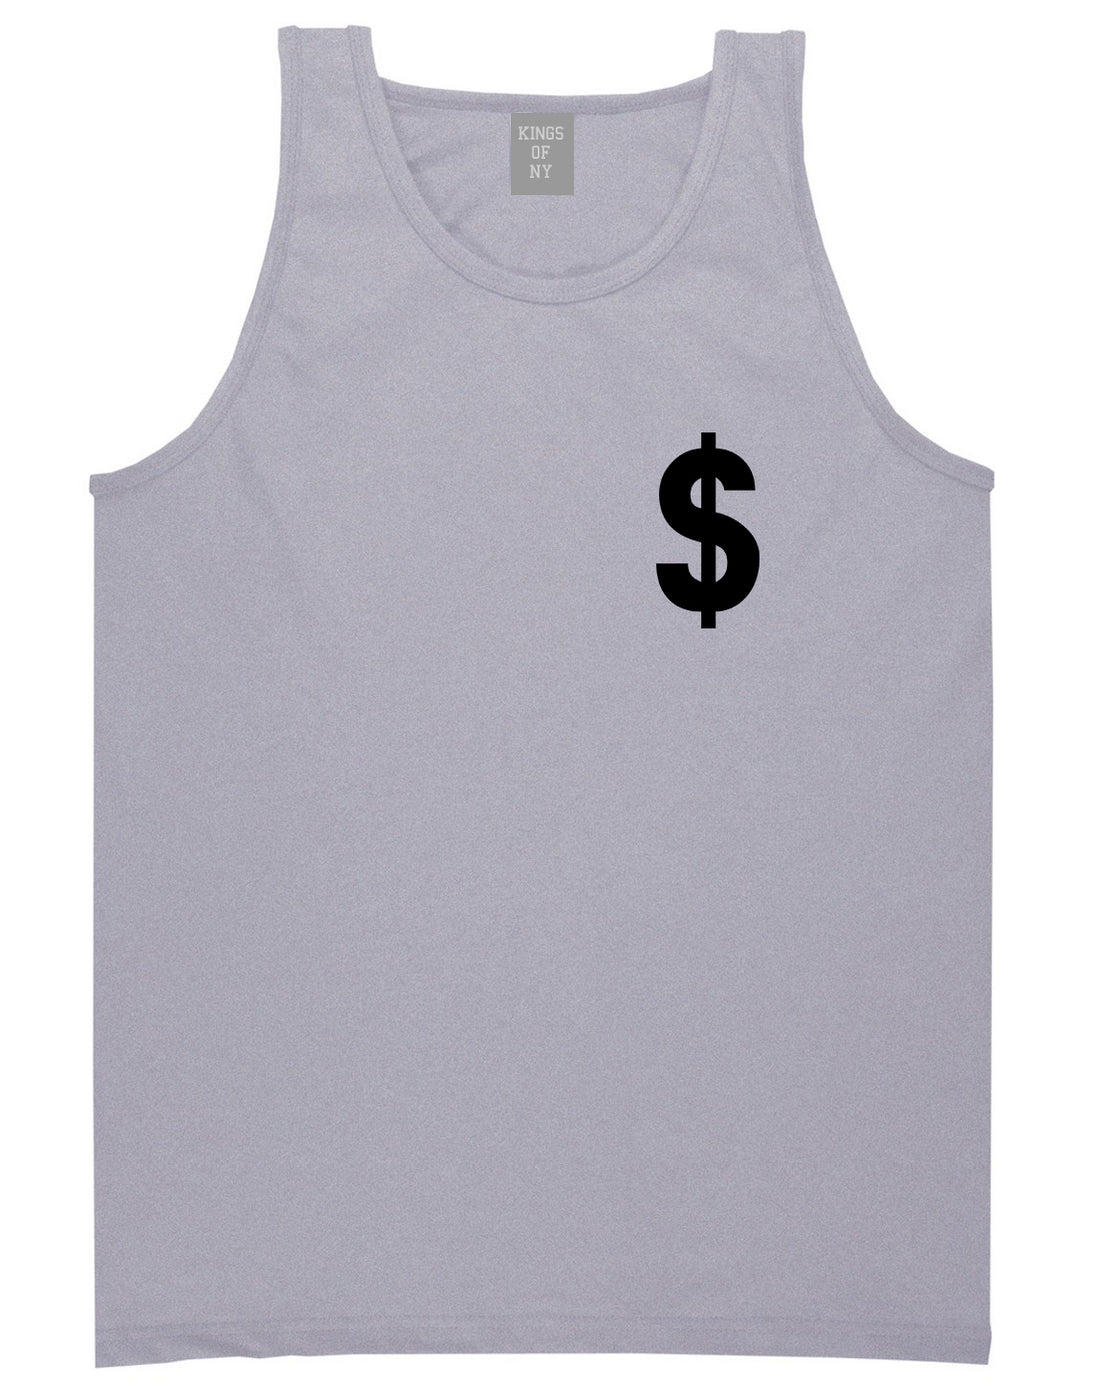 Dollar_Sign_Simple_Chest Mens Grey Tank Top Shirt by Kings Of NY